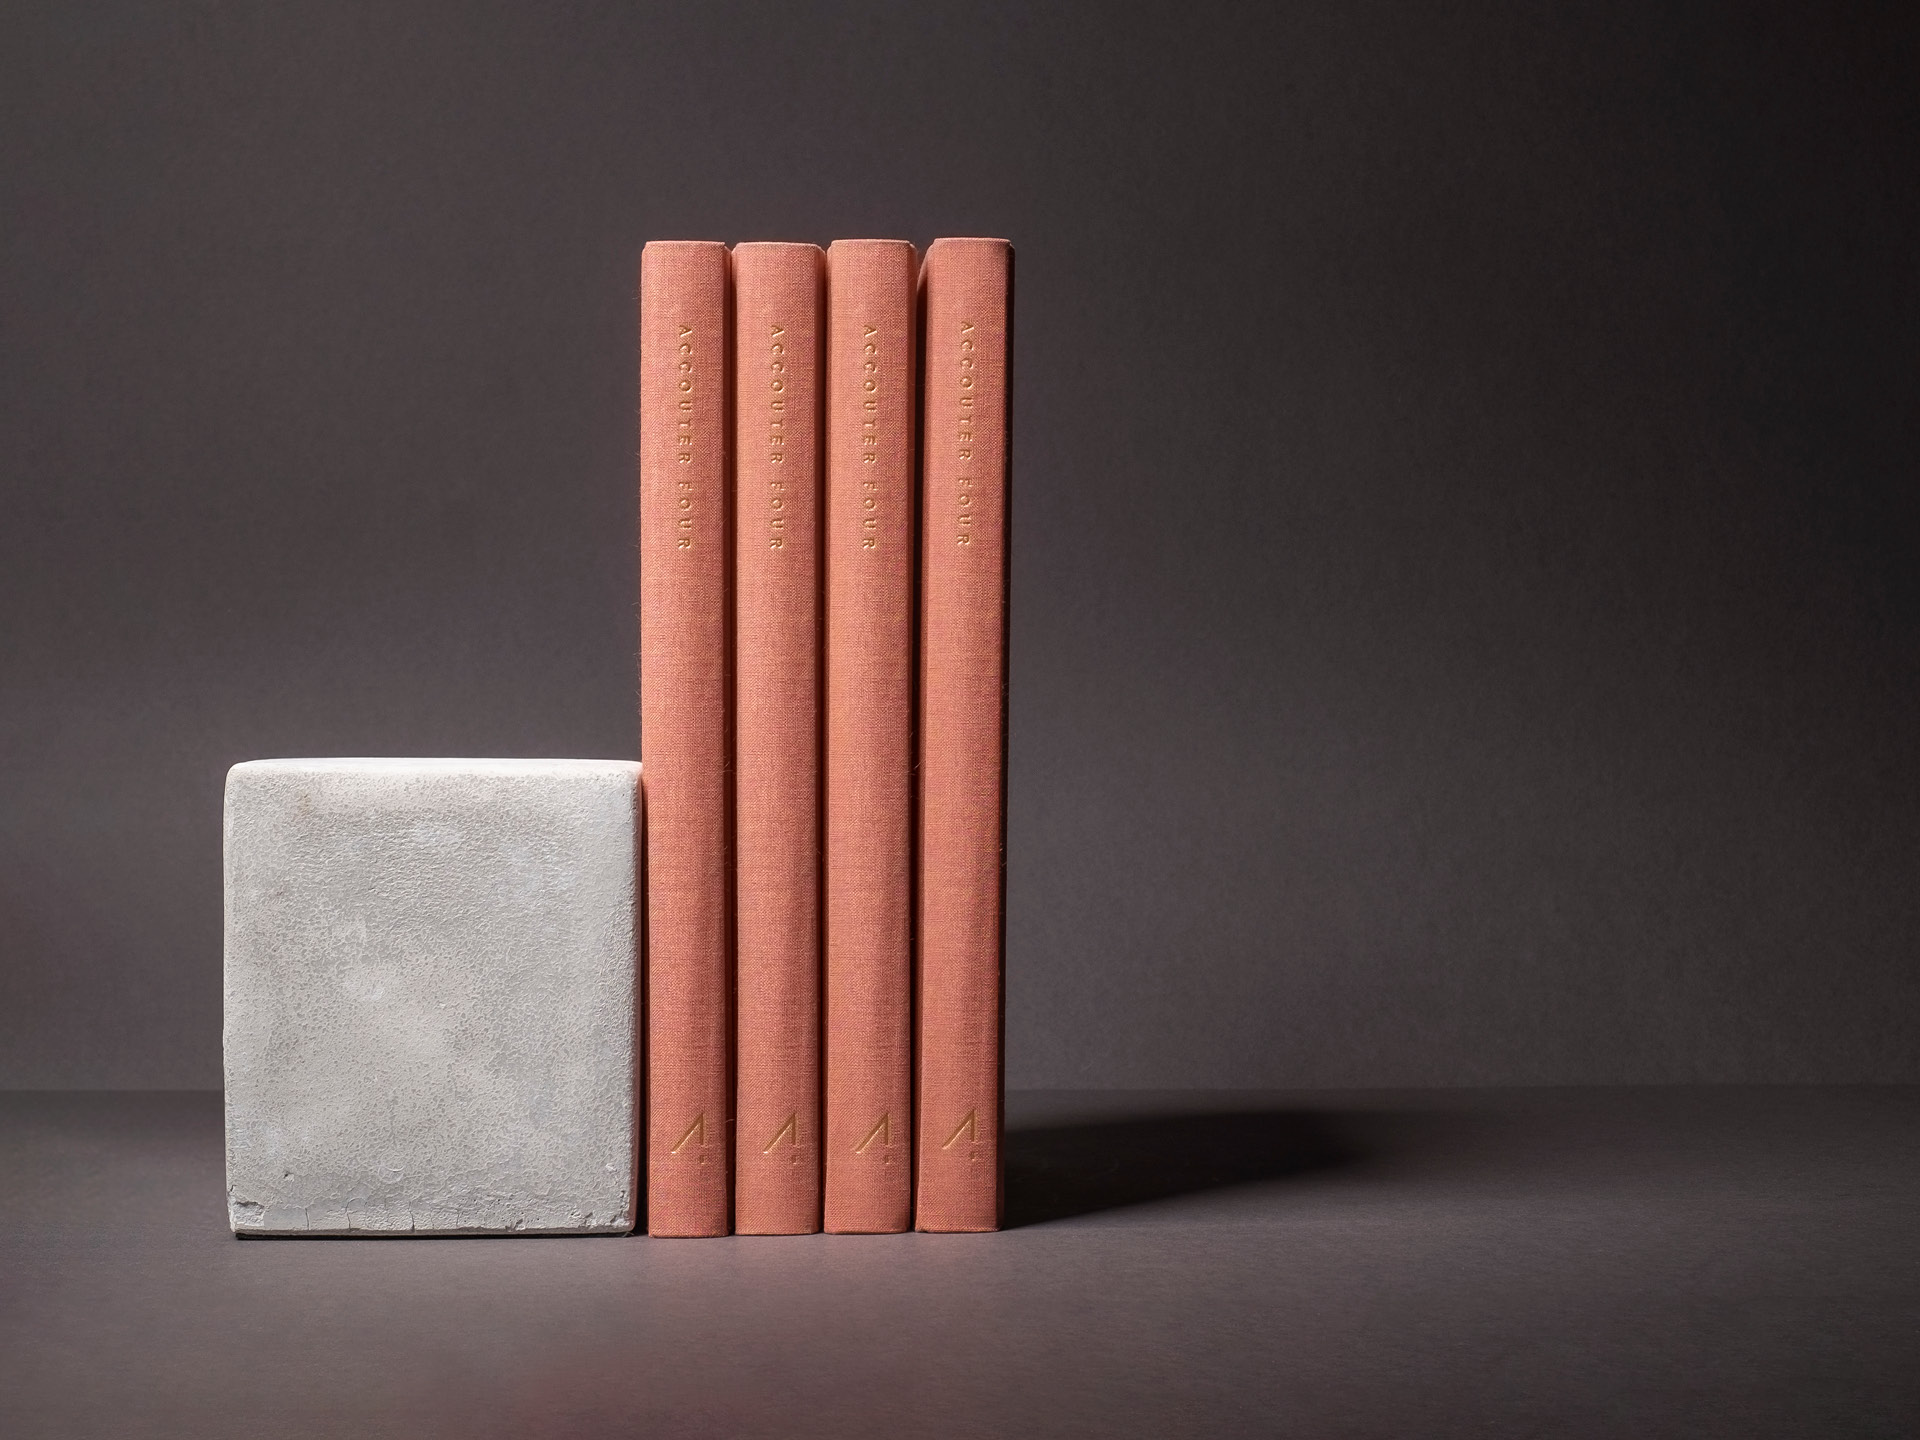 Four copper foiled books standing on end next to a concrete block